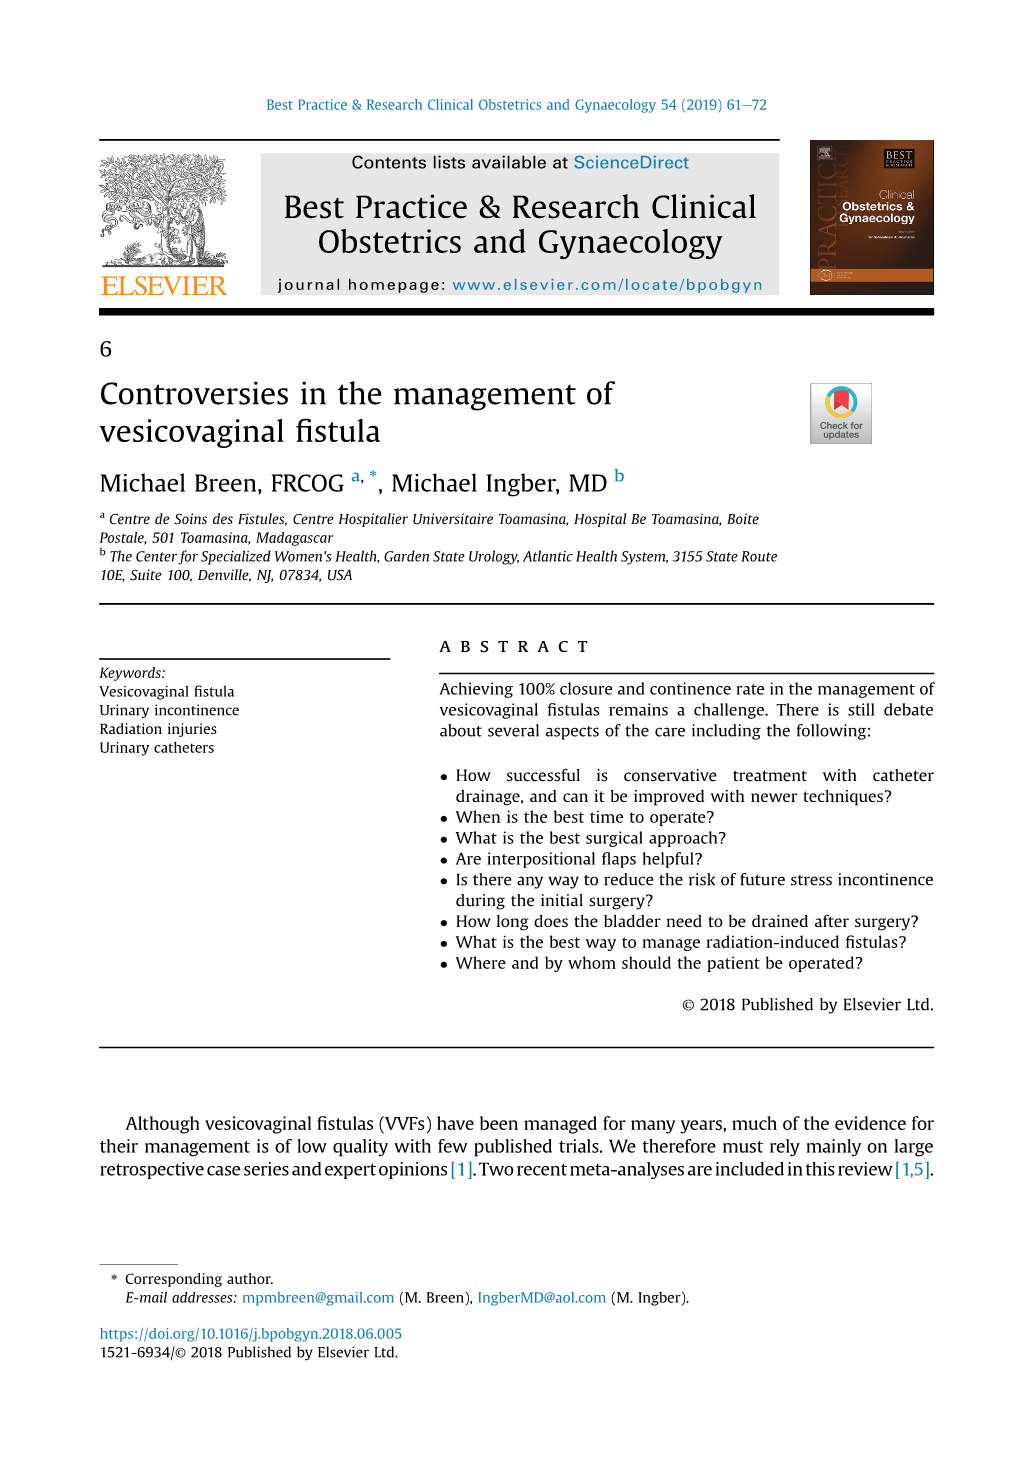 Controversies in the Management of Vesicovaginal Fistula